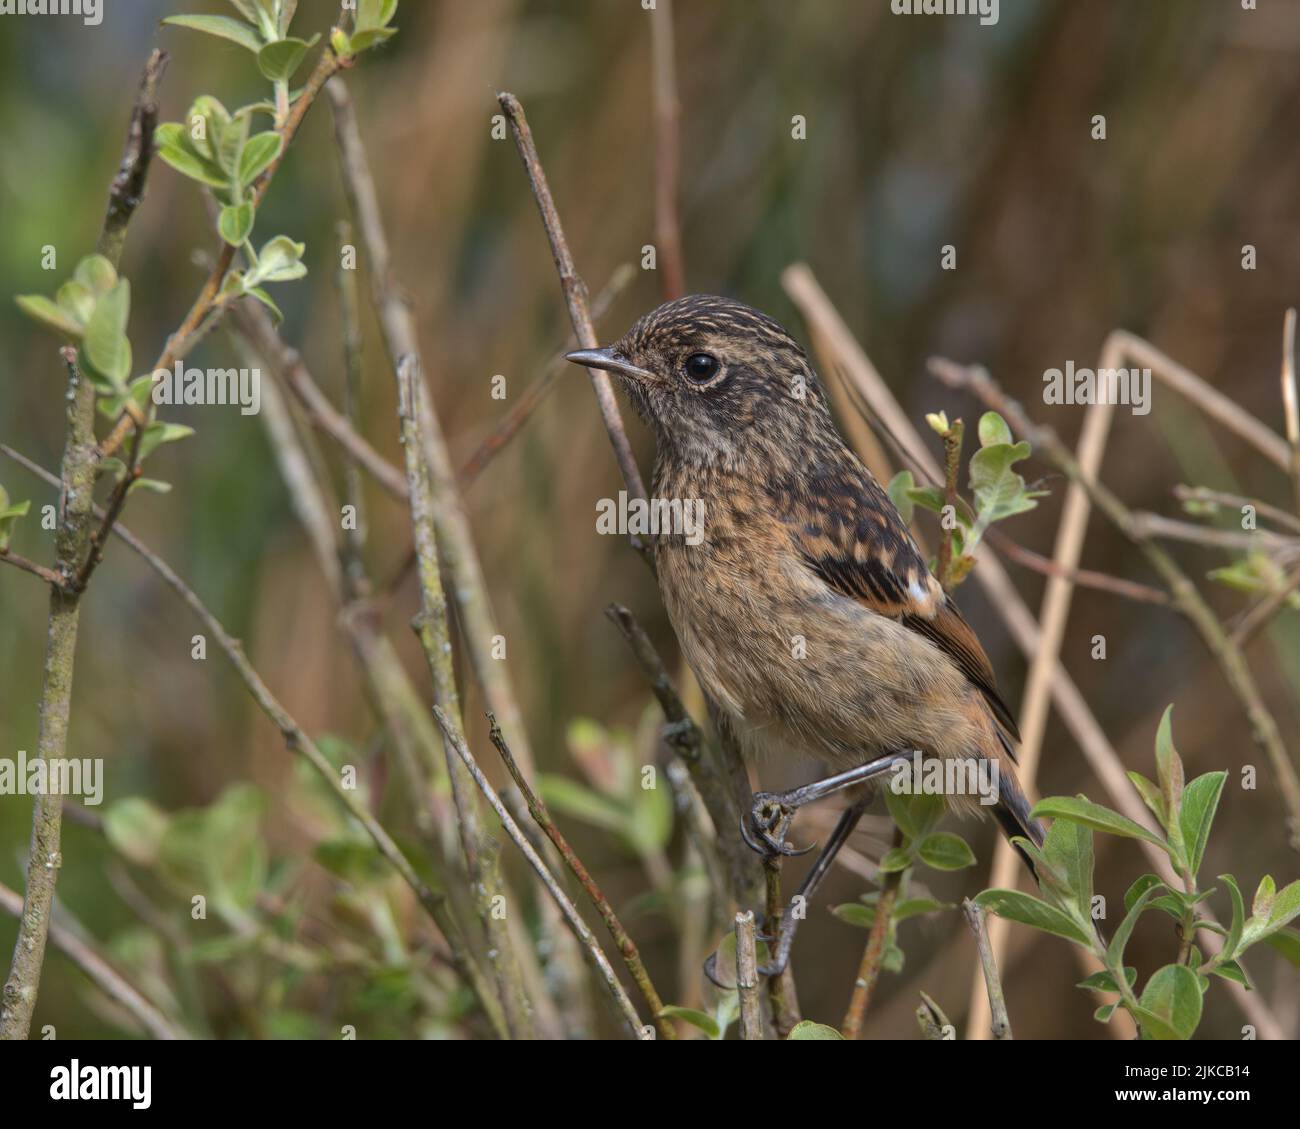 Fledgling Stonechat perched on a branch. Stock Photo